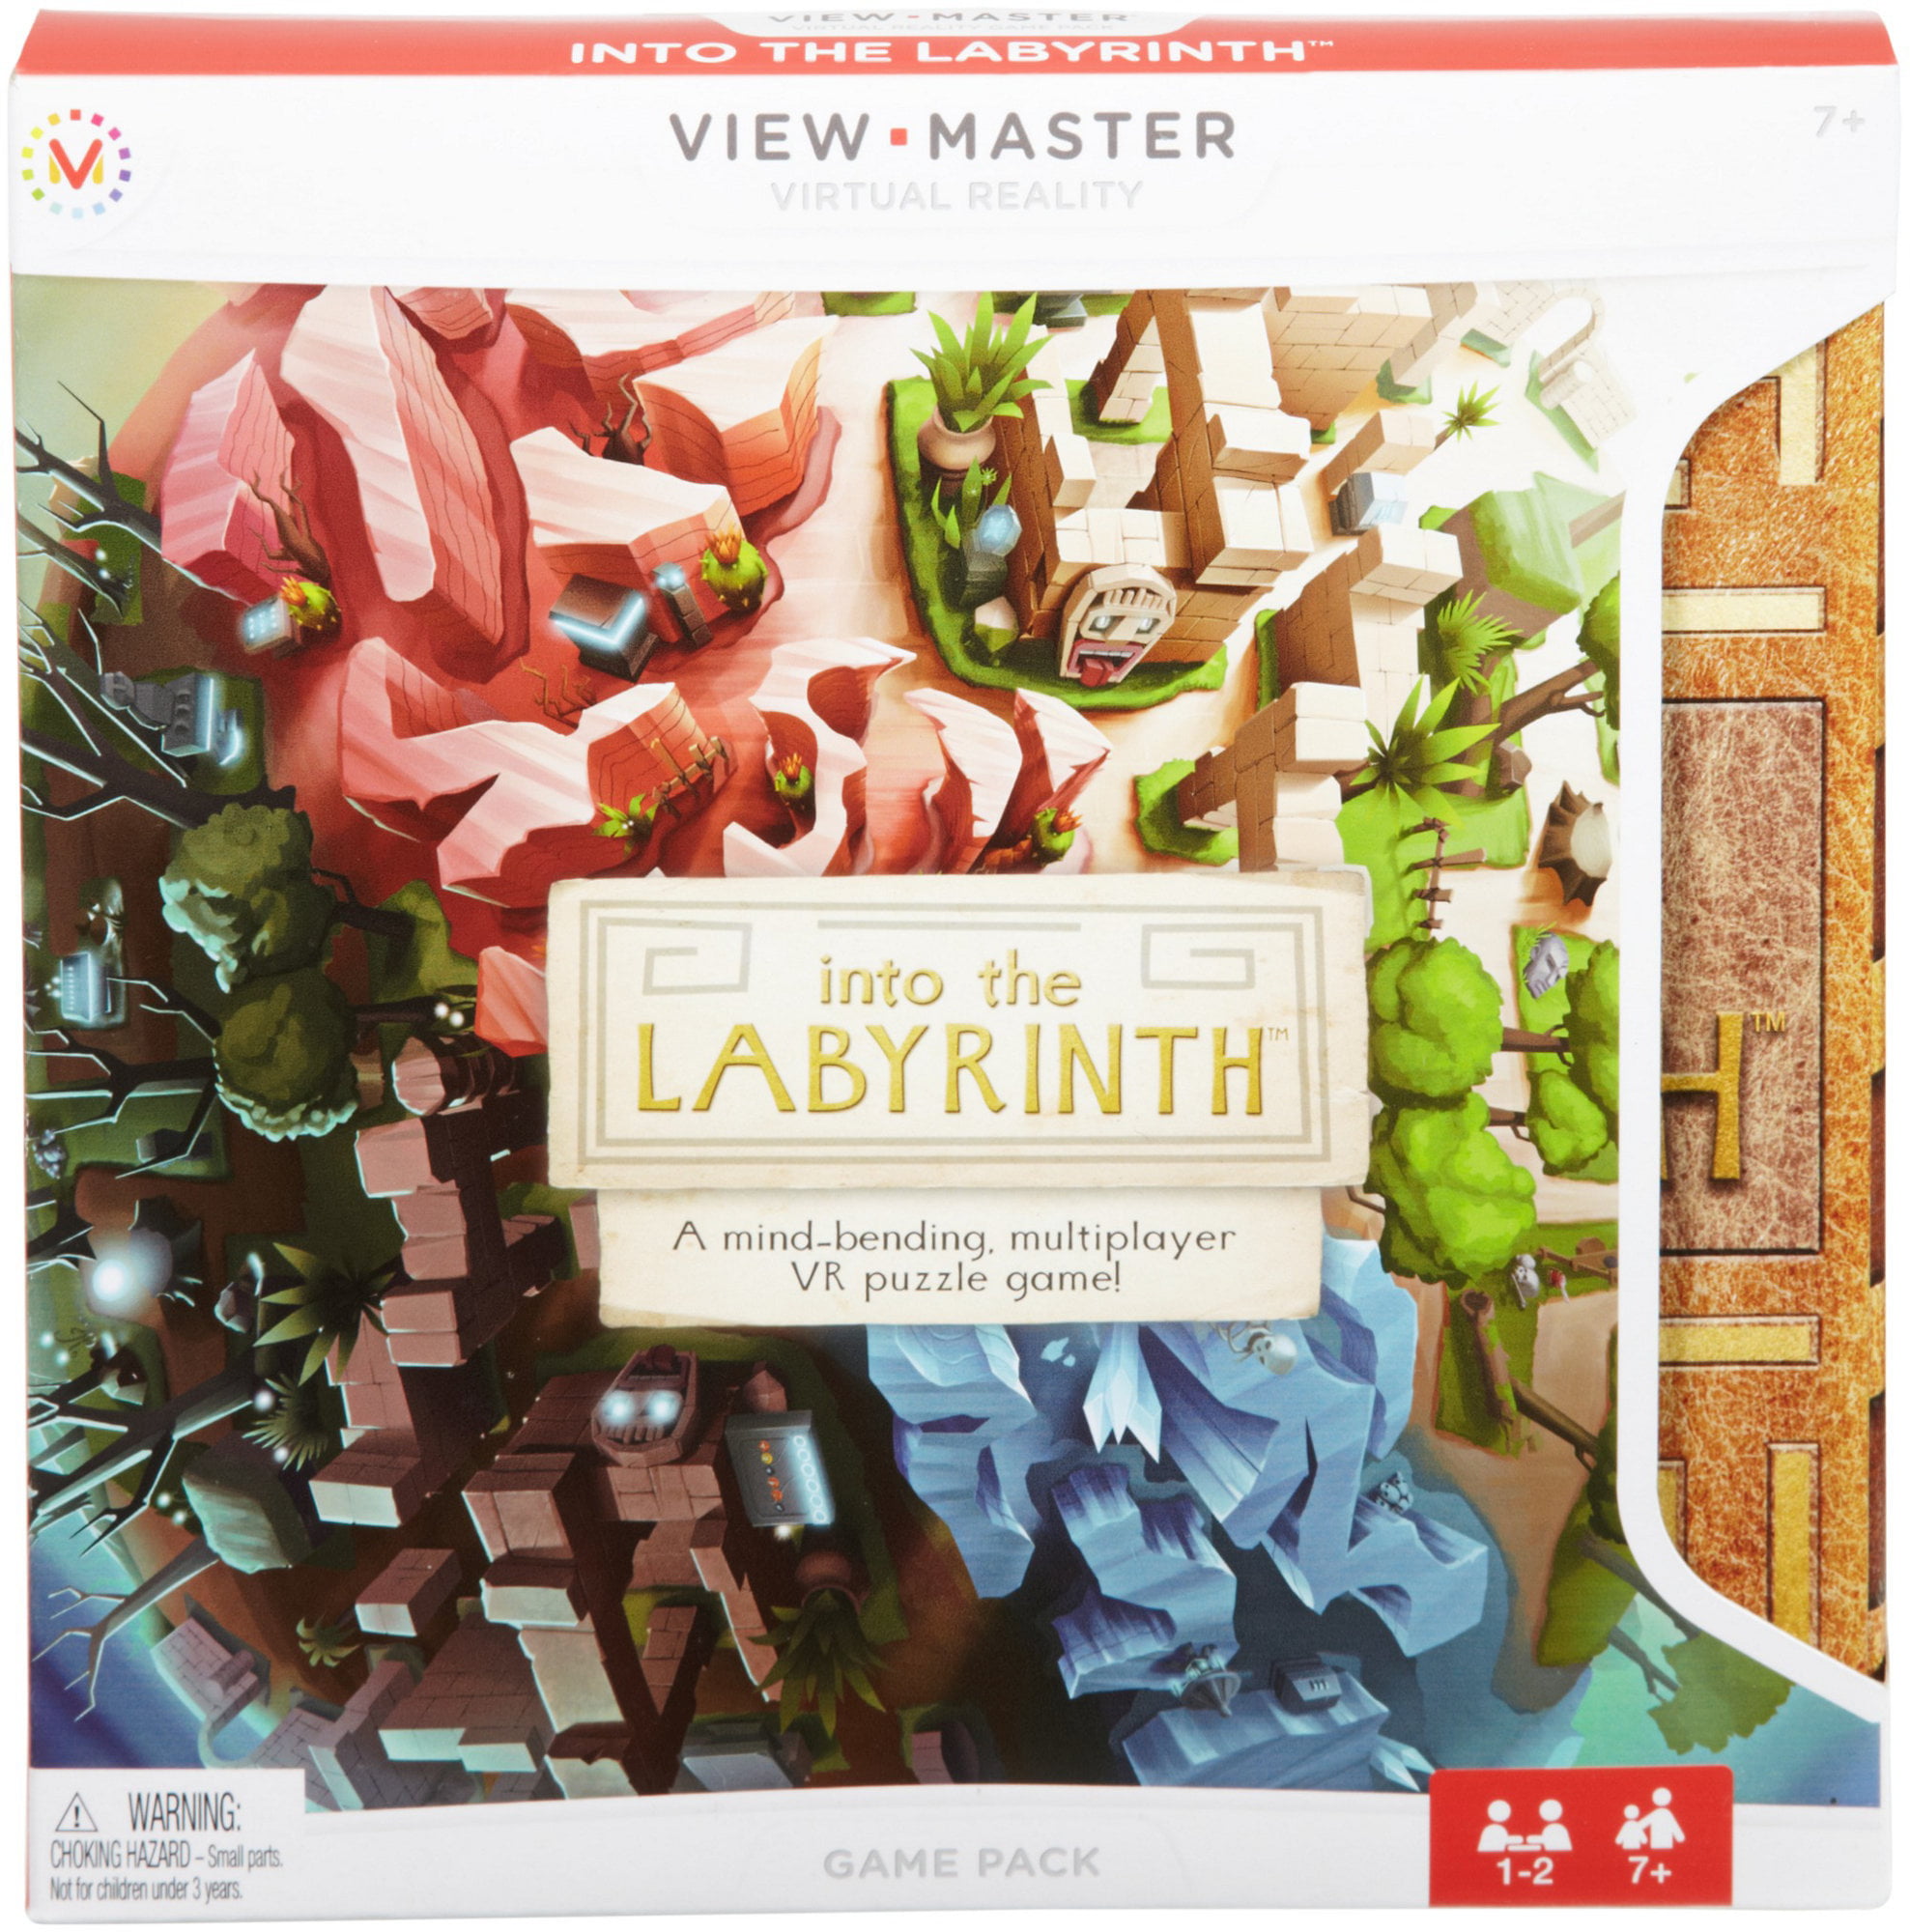 View-Master Into the Labyrinth game pack -- an innovative, mind-bending VR ...